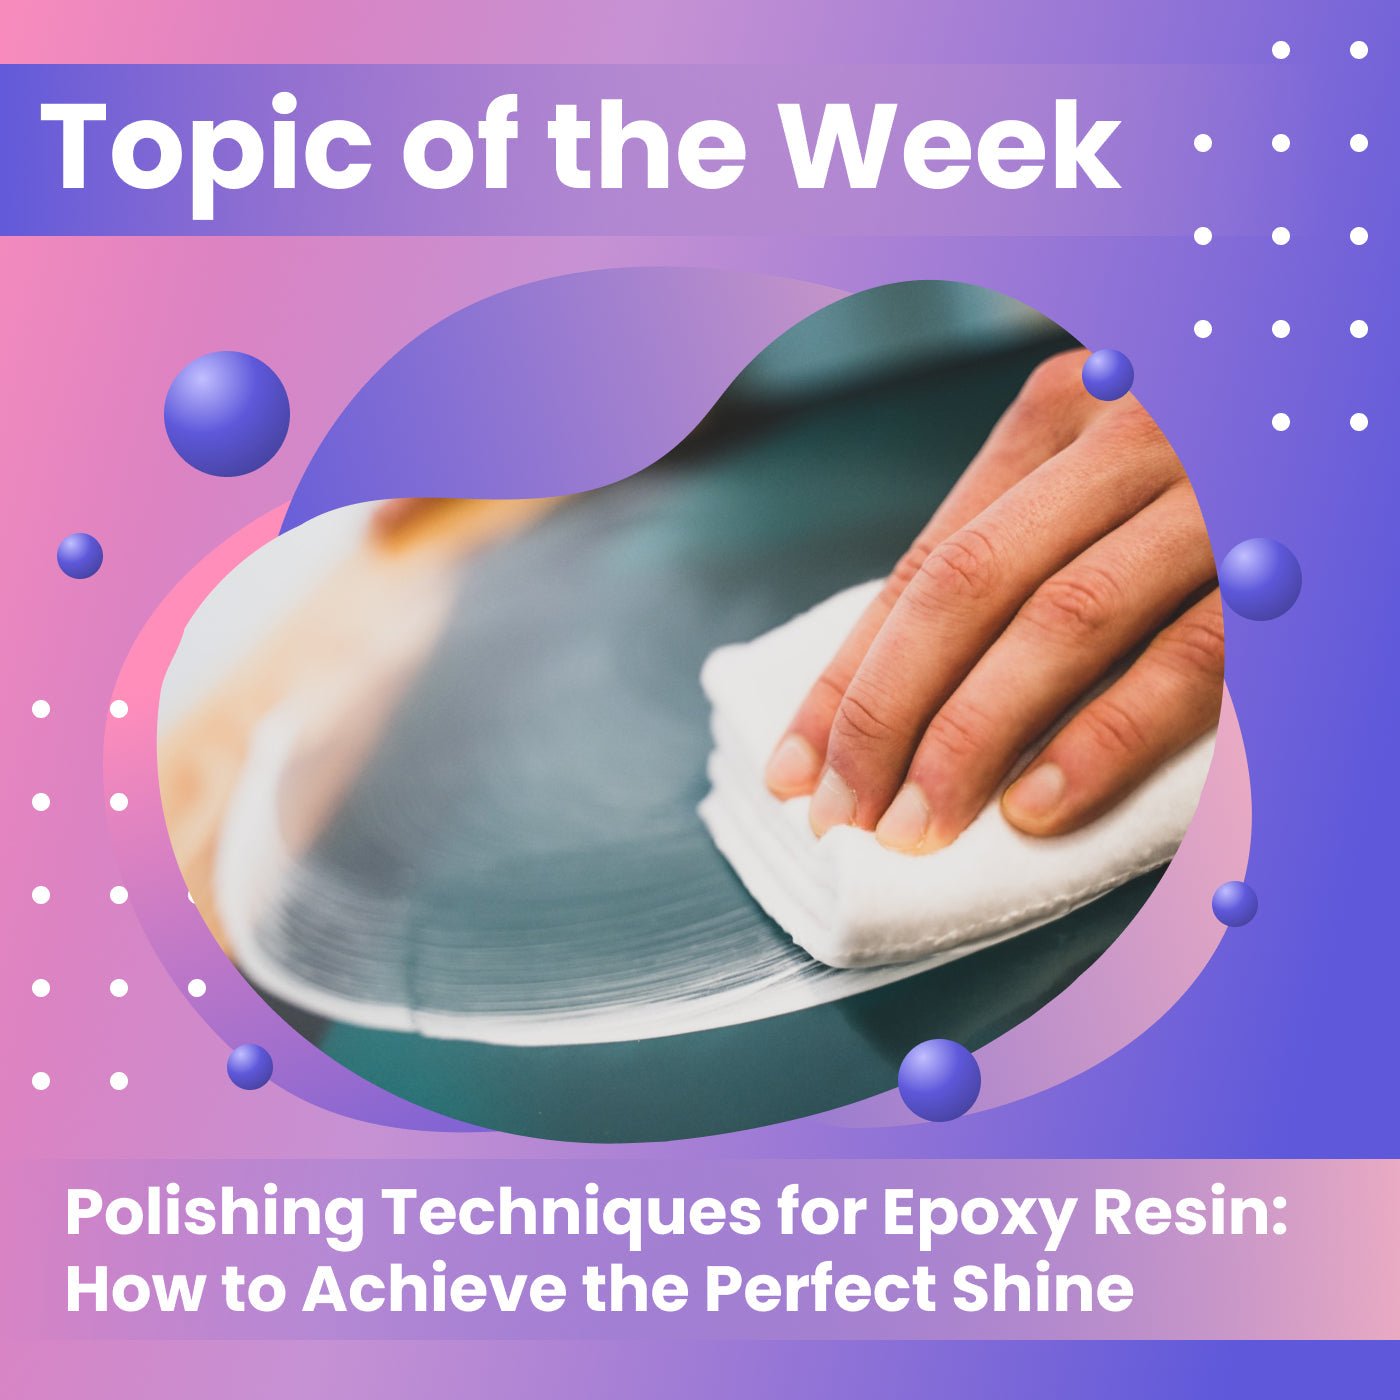 Polishing Techniques for Epoxy Resin: How to Achieve the Perfect Shine